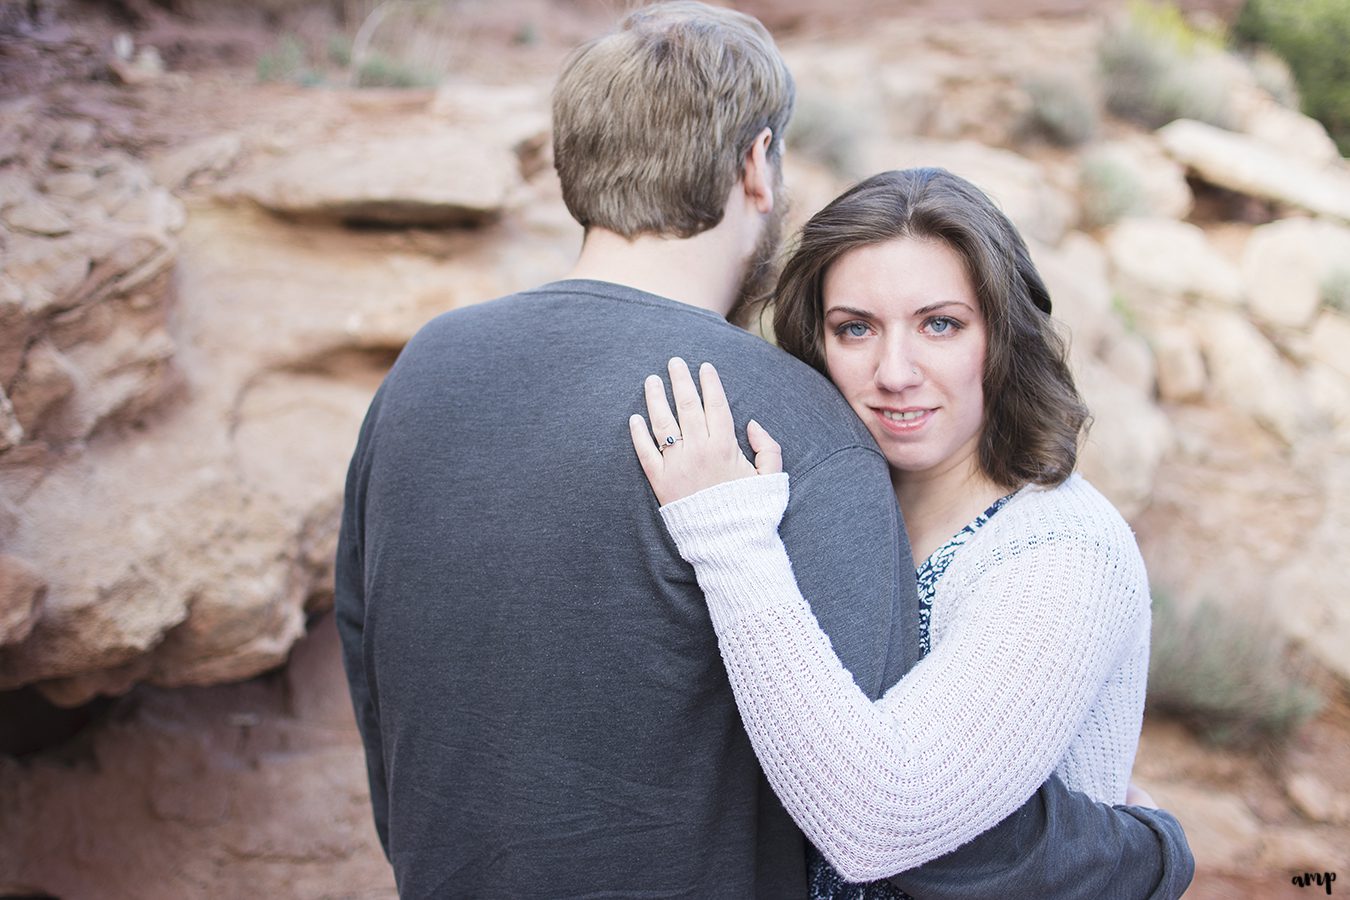 Colorado National Monument Spring Engagement Session in the Desert | Grand Junction | amanda.matilda.photography